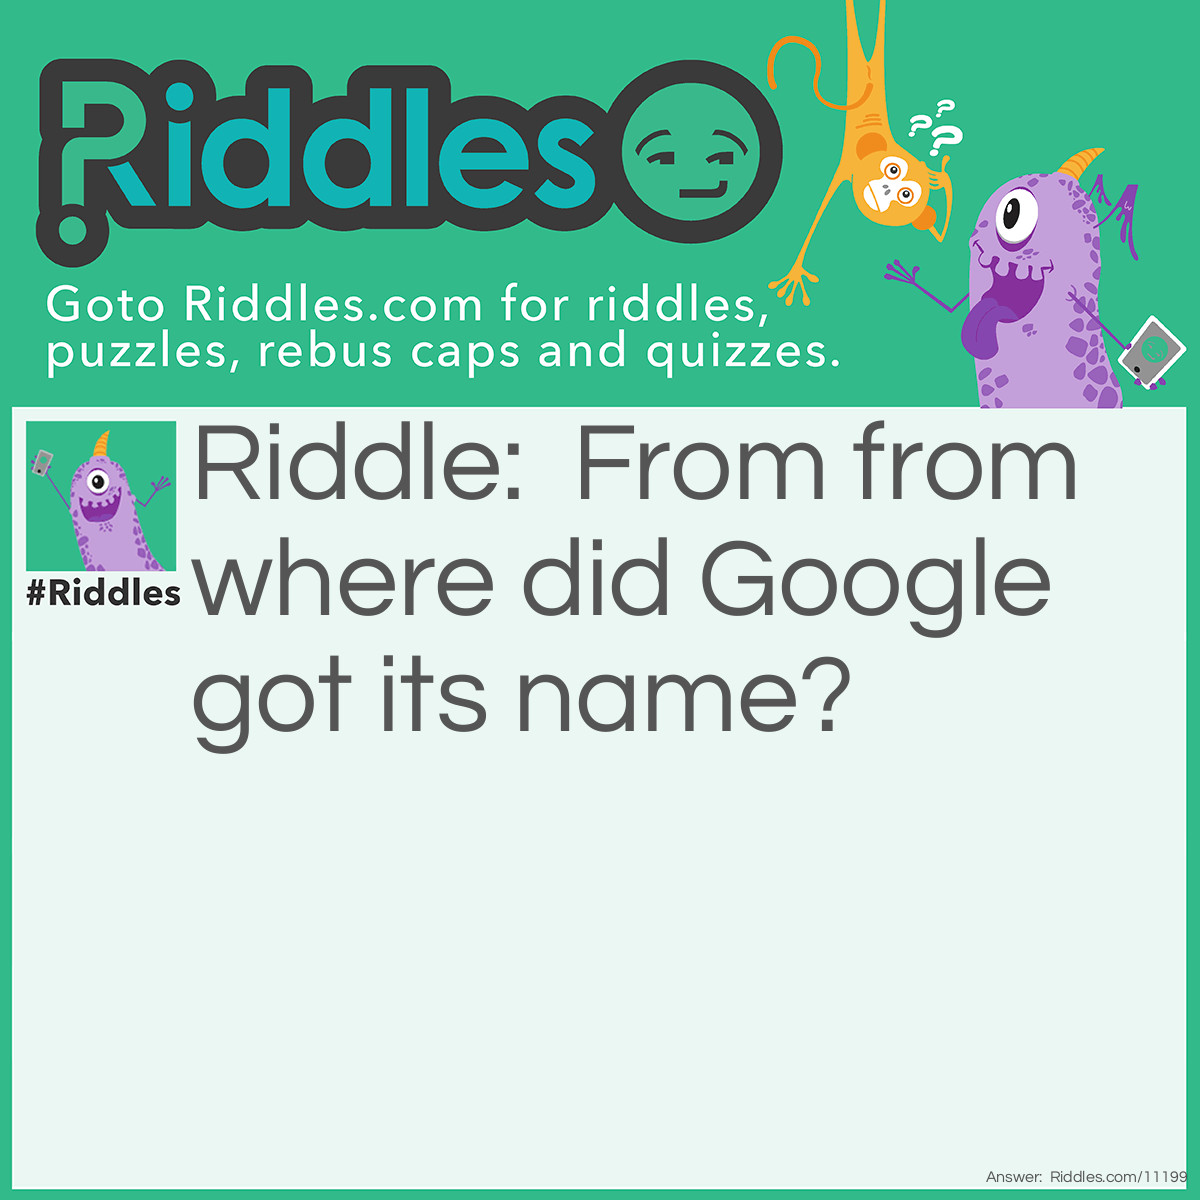 Riddle: From from where did Google got its name? Answer: From googol (1 with 100 zeros)